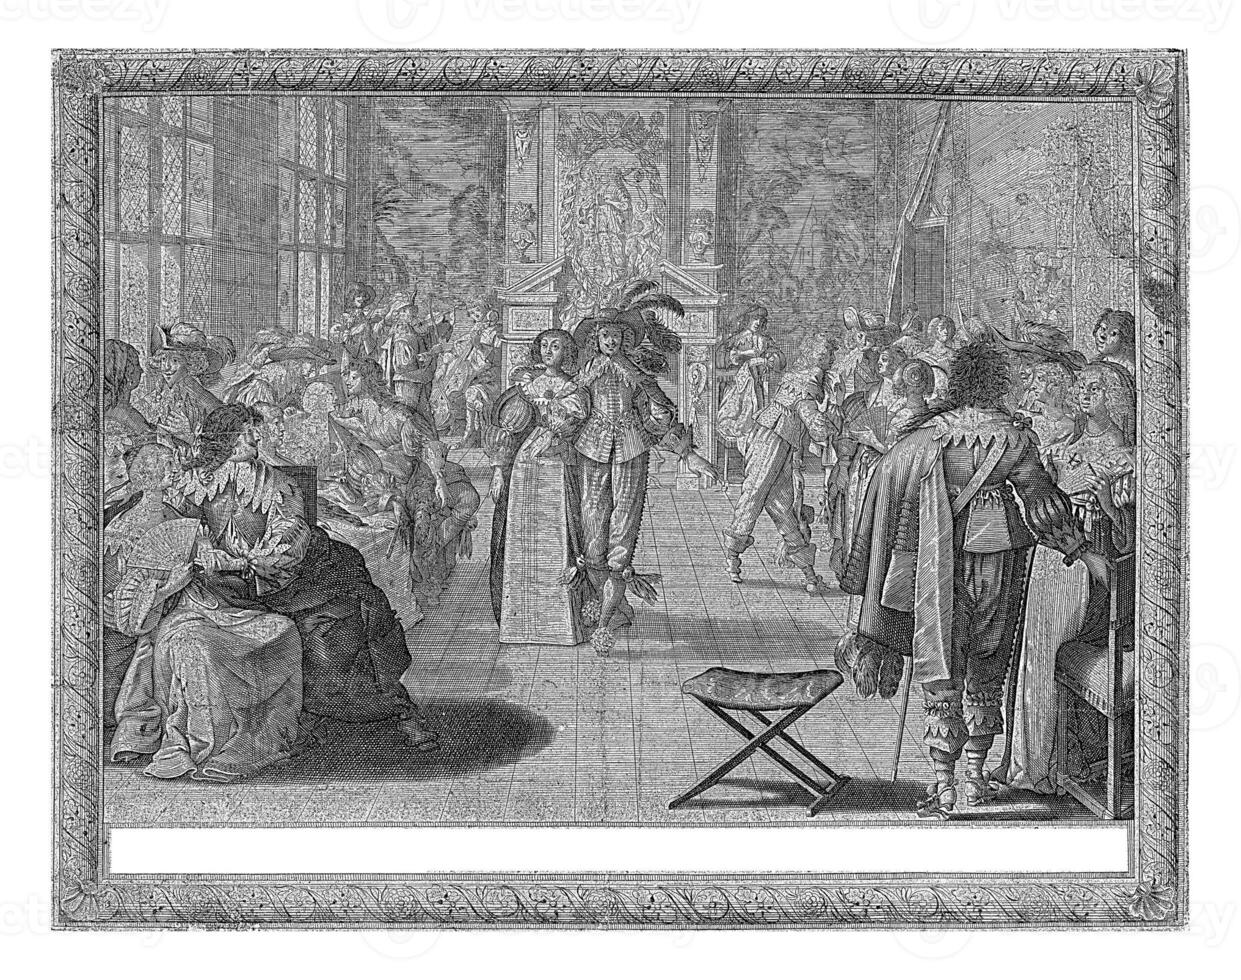 Dancing Man and Woman at a Ball, Abraham Bosse possibly, c. 1633 photo